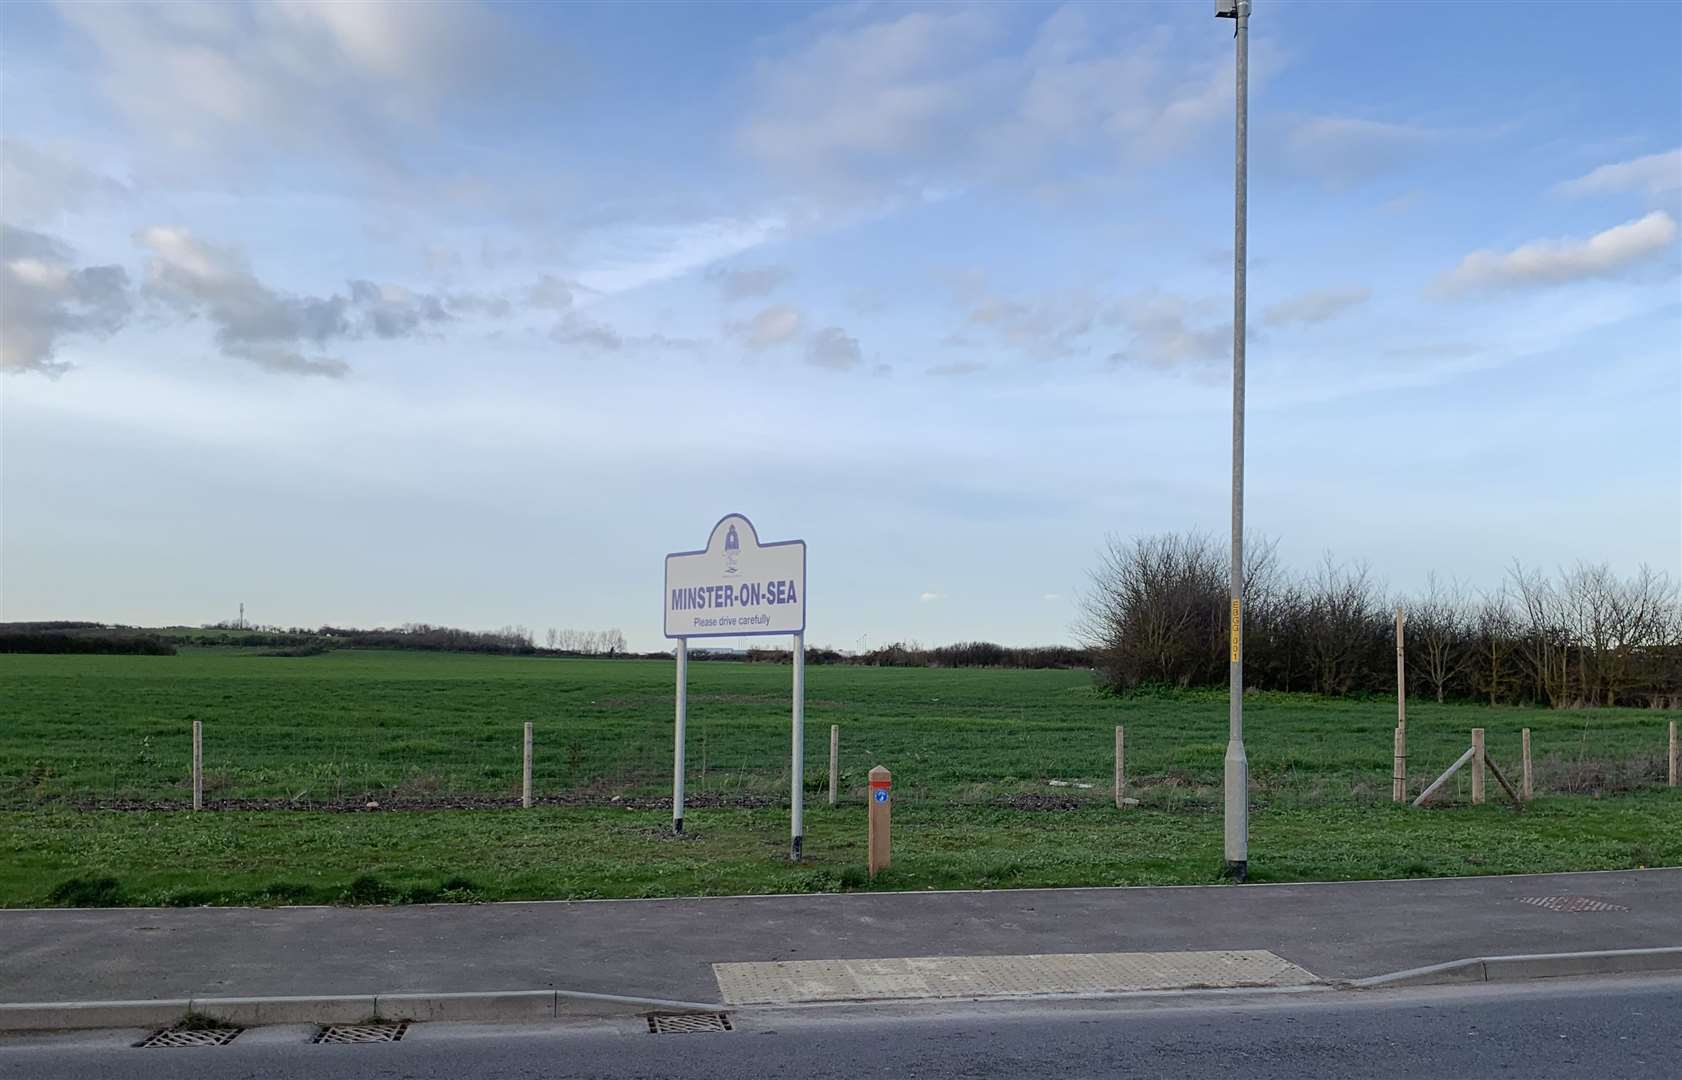 The site off Barton Hill Drive, Minster